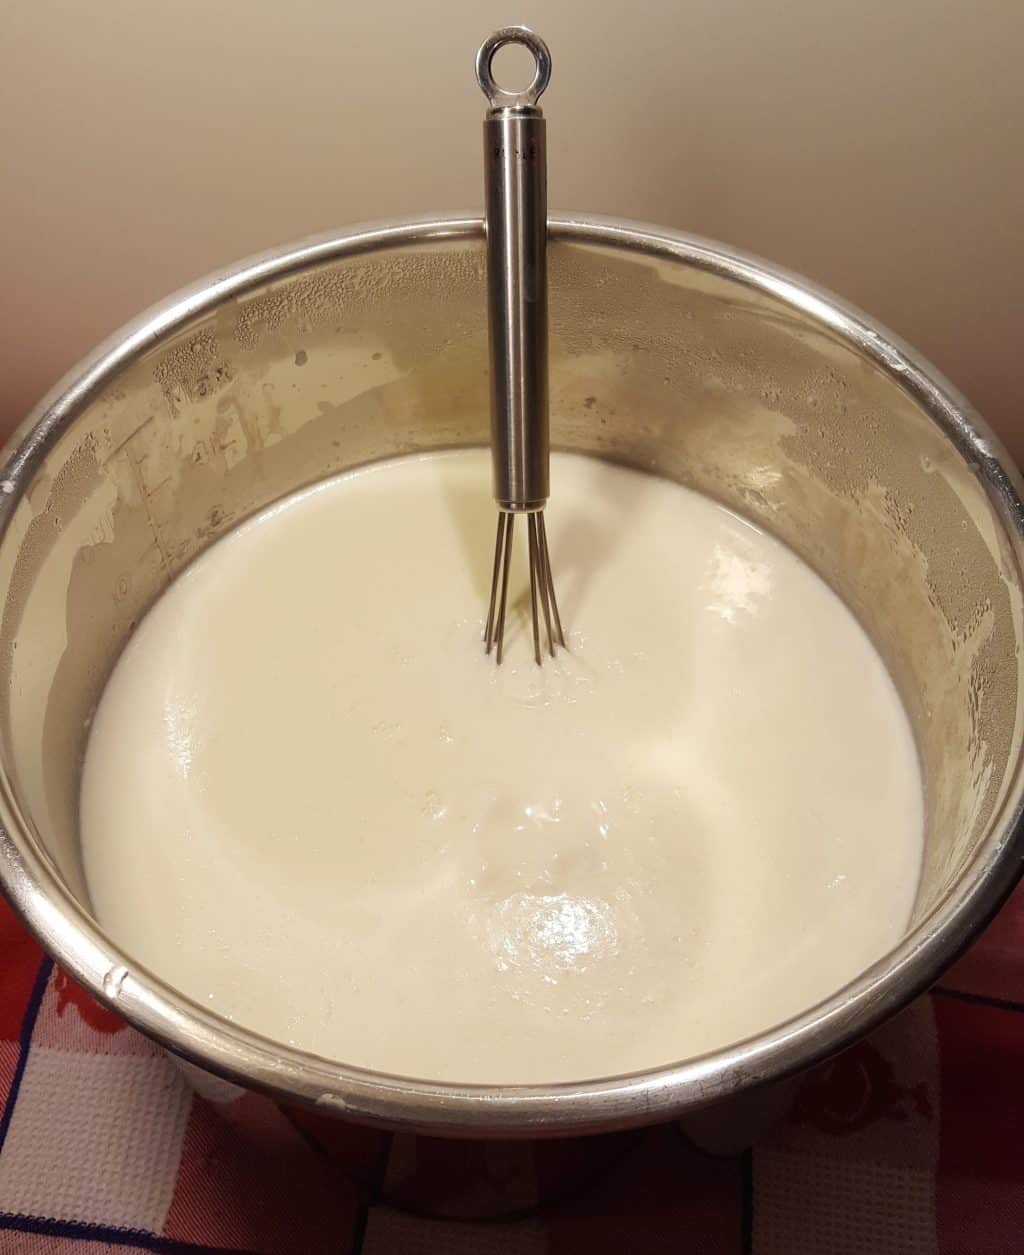 Give the Yogurt a Quick Whisk